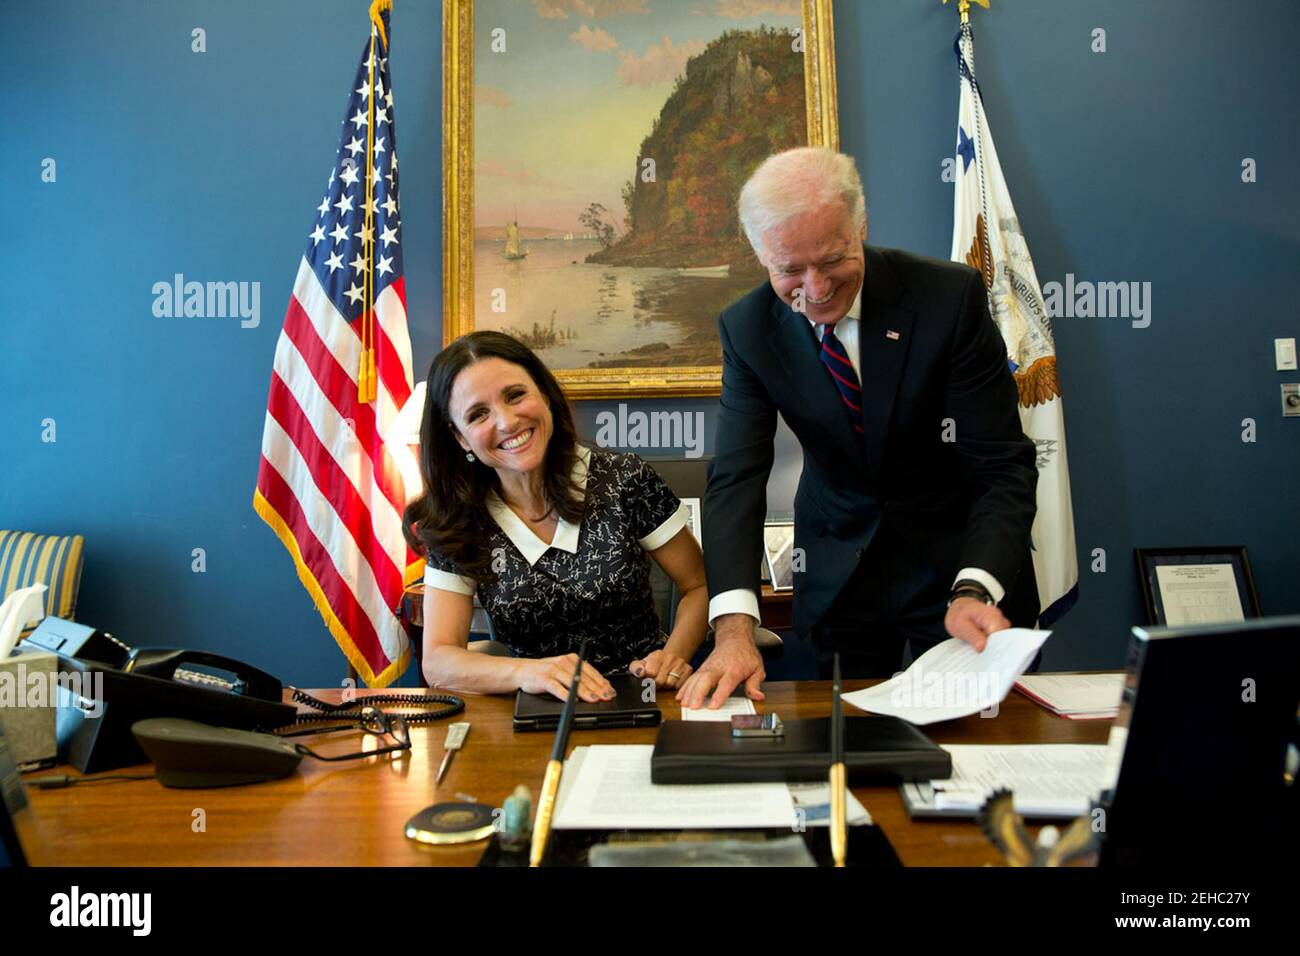 April 12, 2013 'Filling in for David Lienemann, Lawrence Jackson made this photograph of the real Vice President, with Julia-Louise Dreyfus, star of the HBO show Veep', in his West Wing office of the White House.' Stock Photo